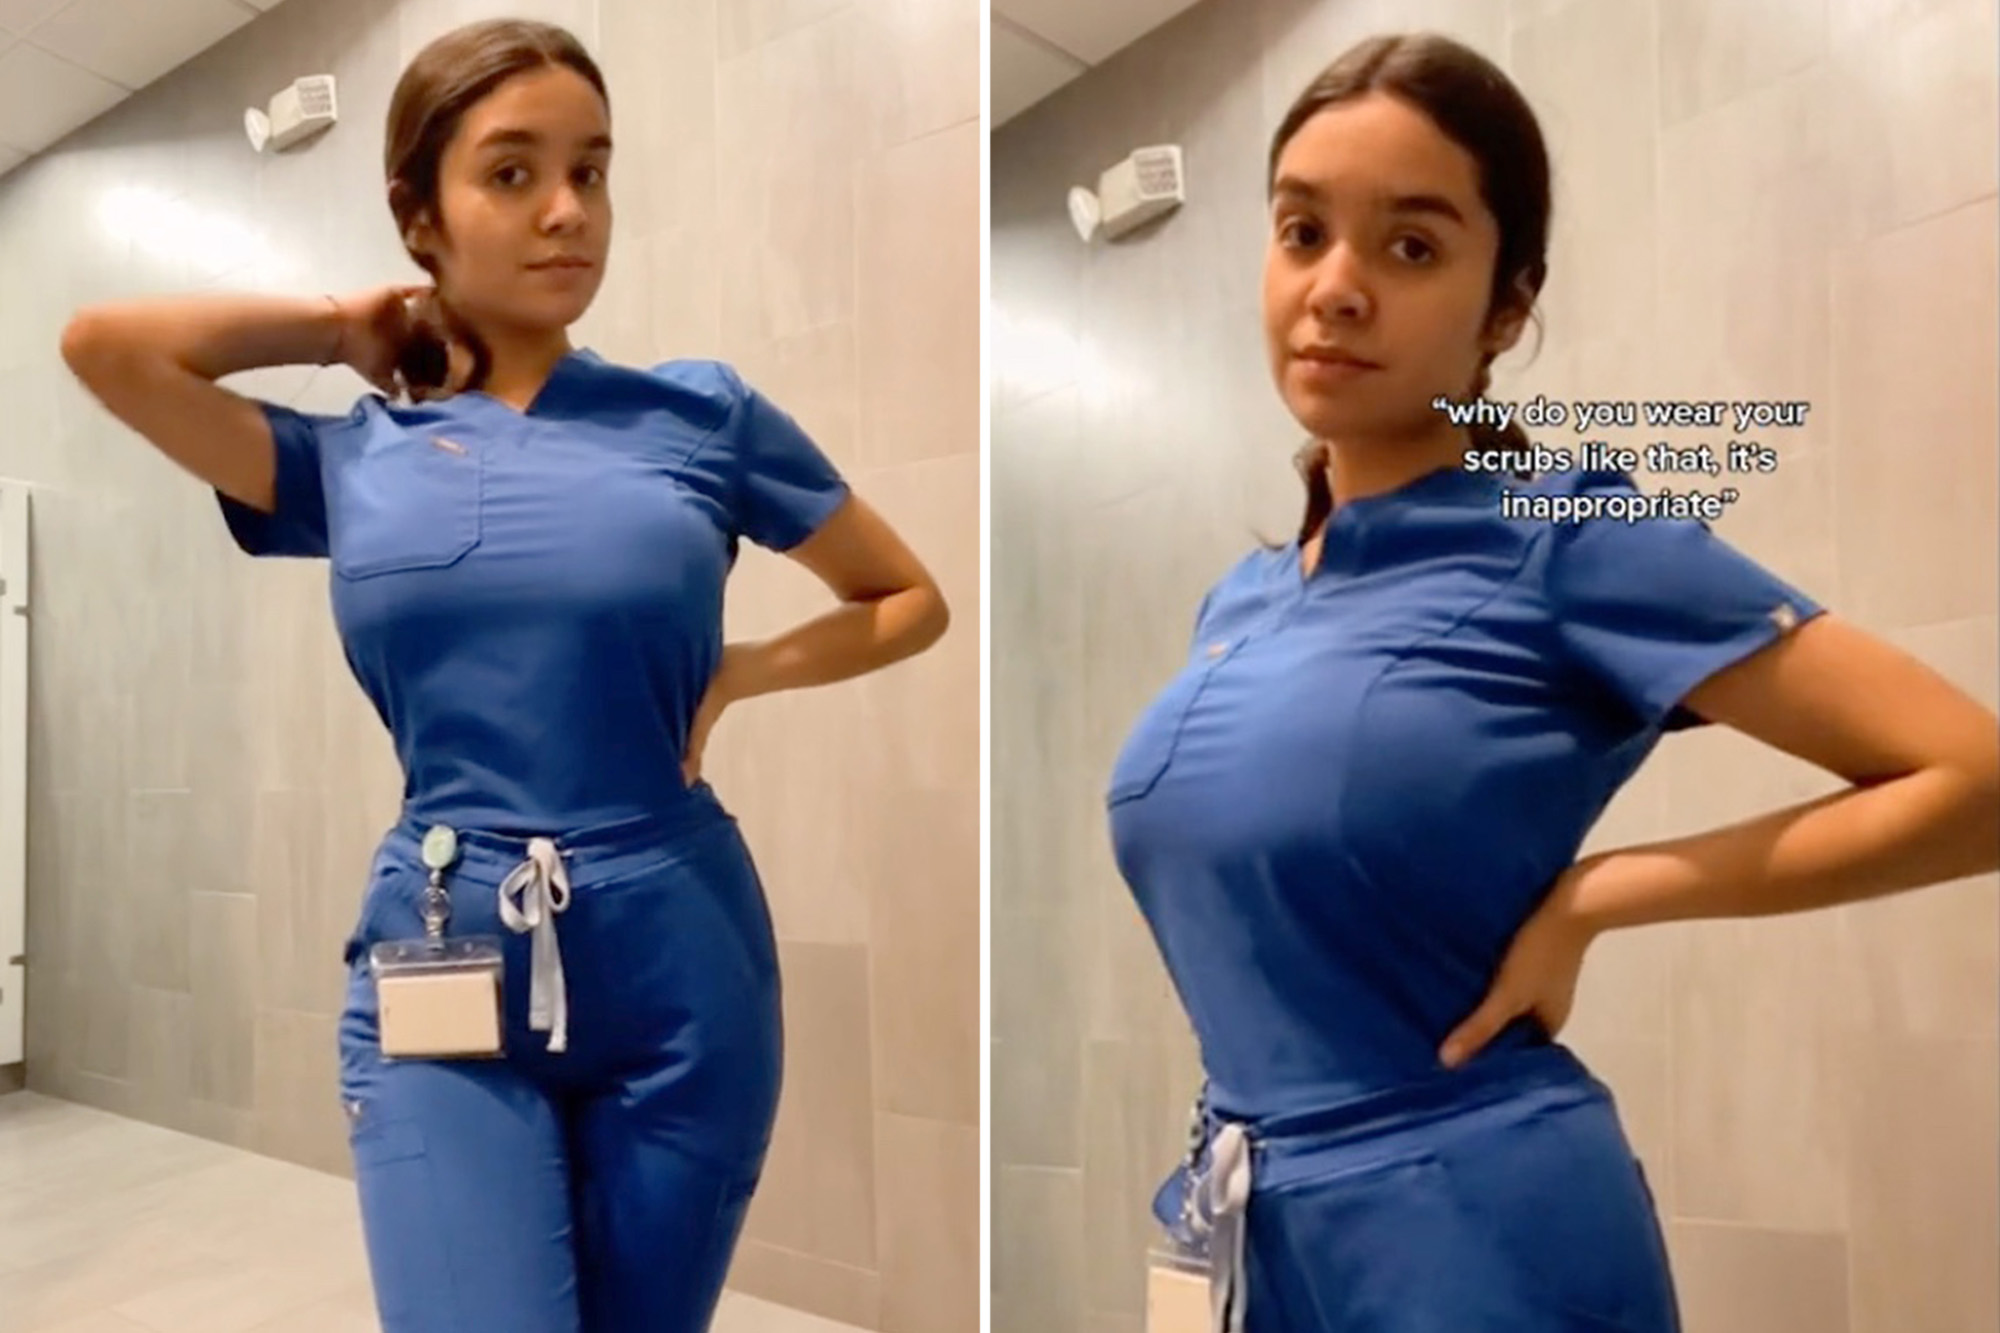 chrissy silk recommends nurse in scrubs hj pic